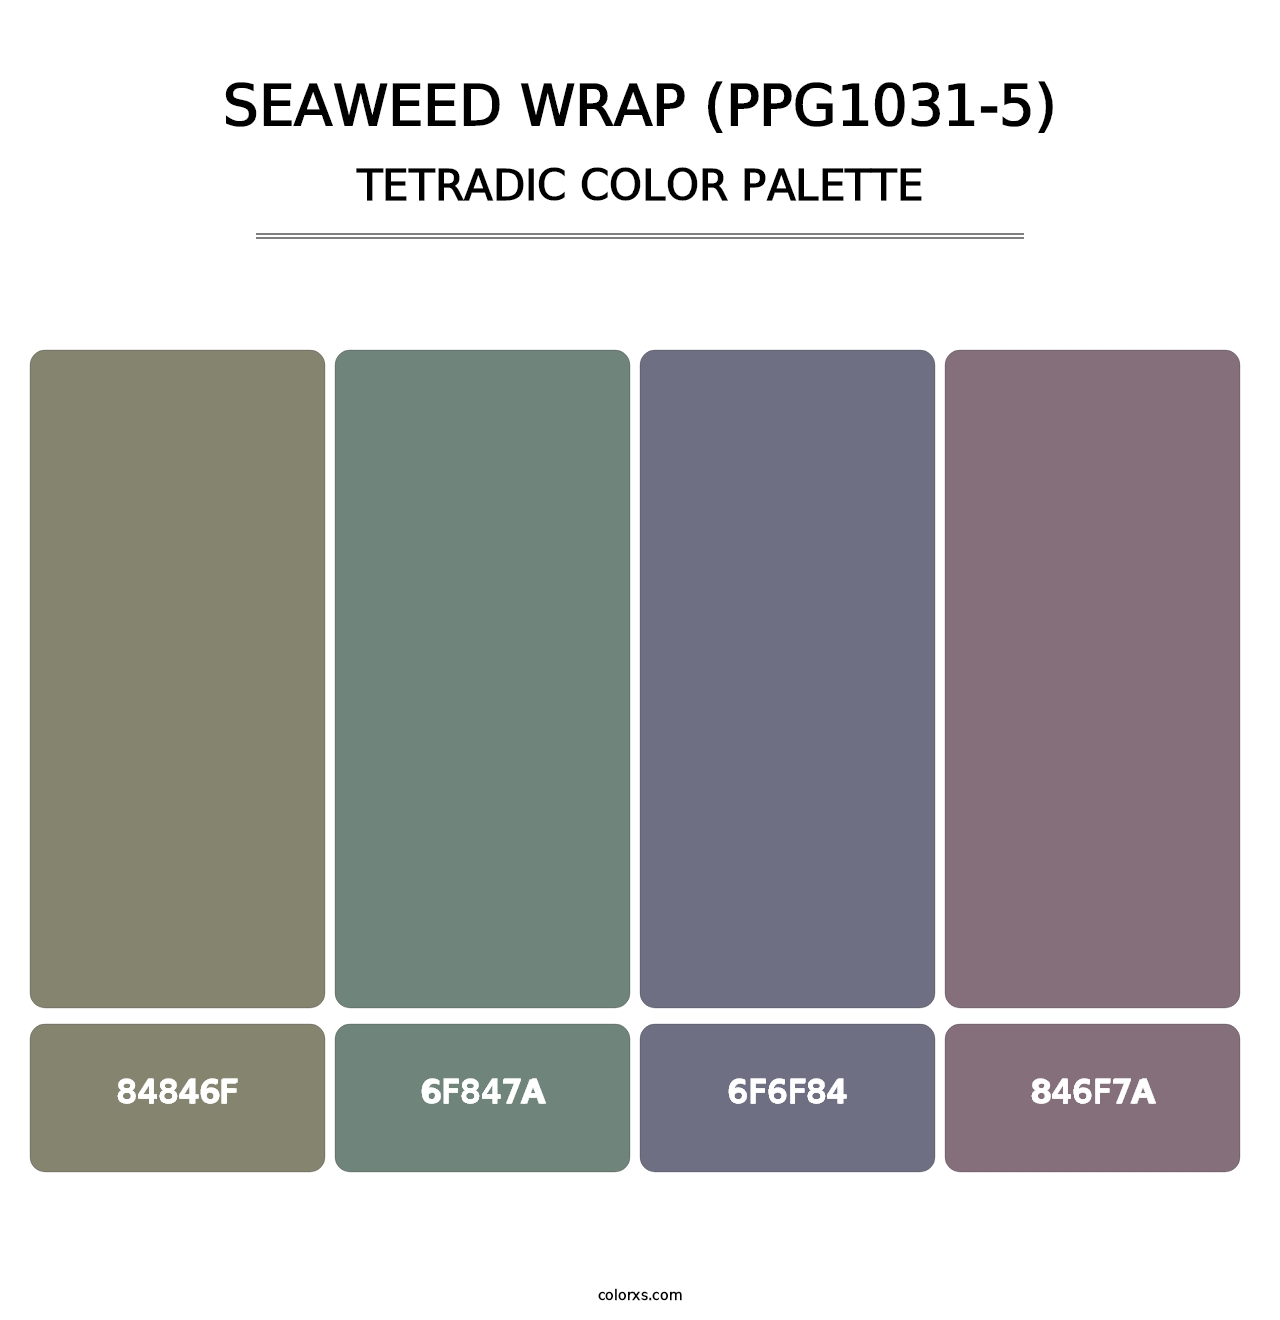 Seaweed Wrap (PPG1031-5) - Tetradic Color Palette